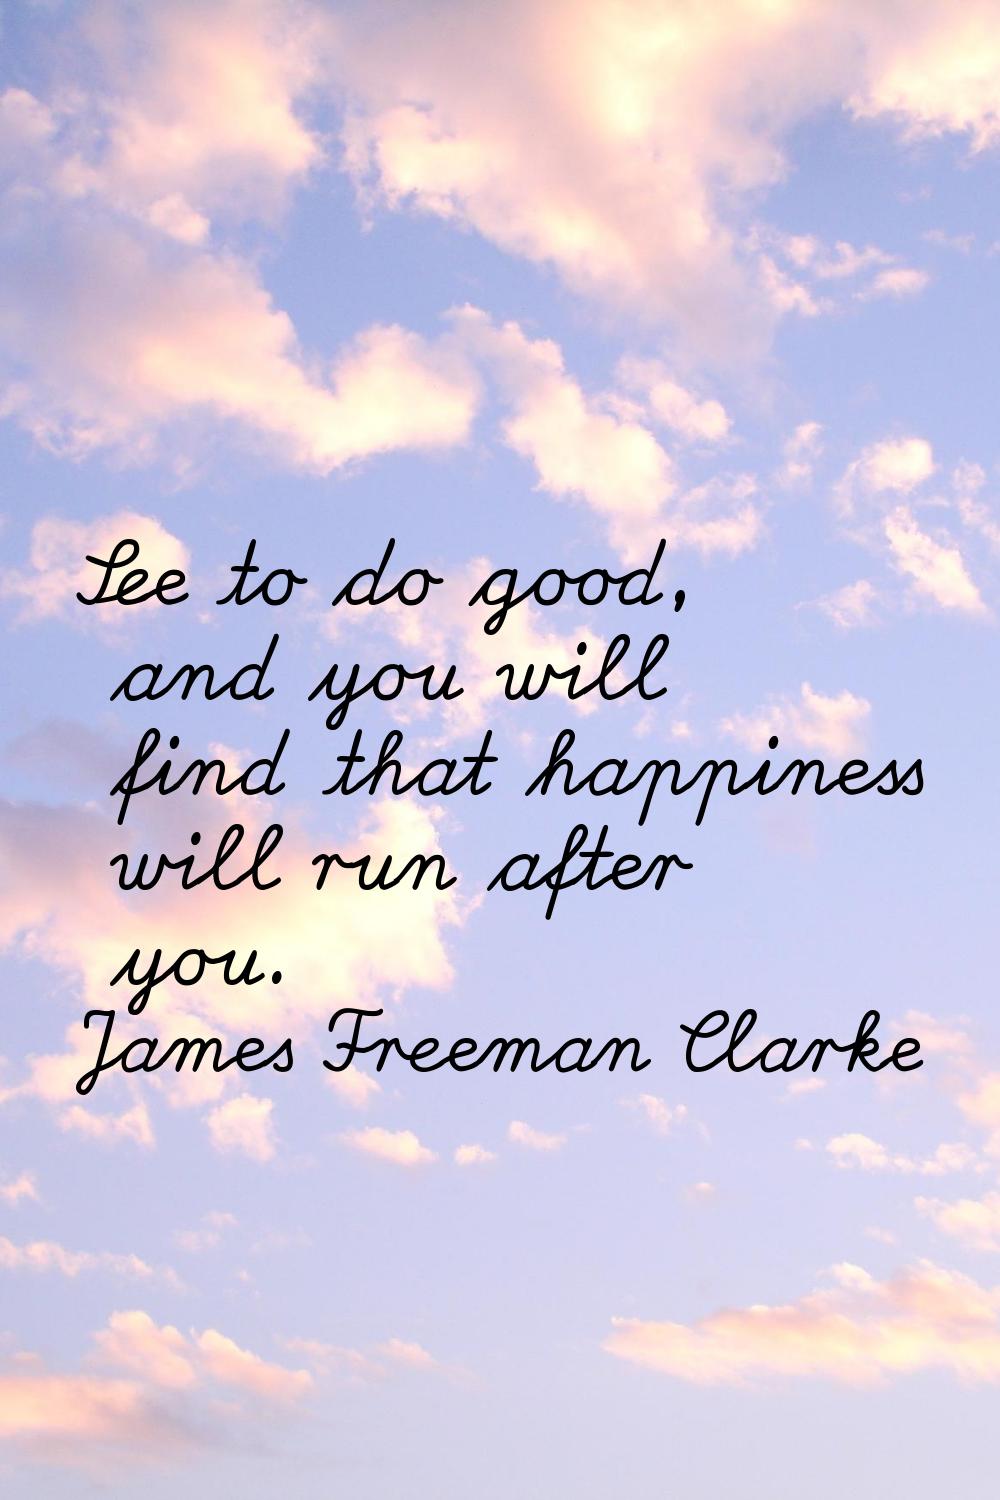 See to do good, and you will find that happiness will run after you.